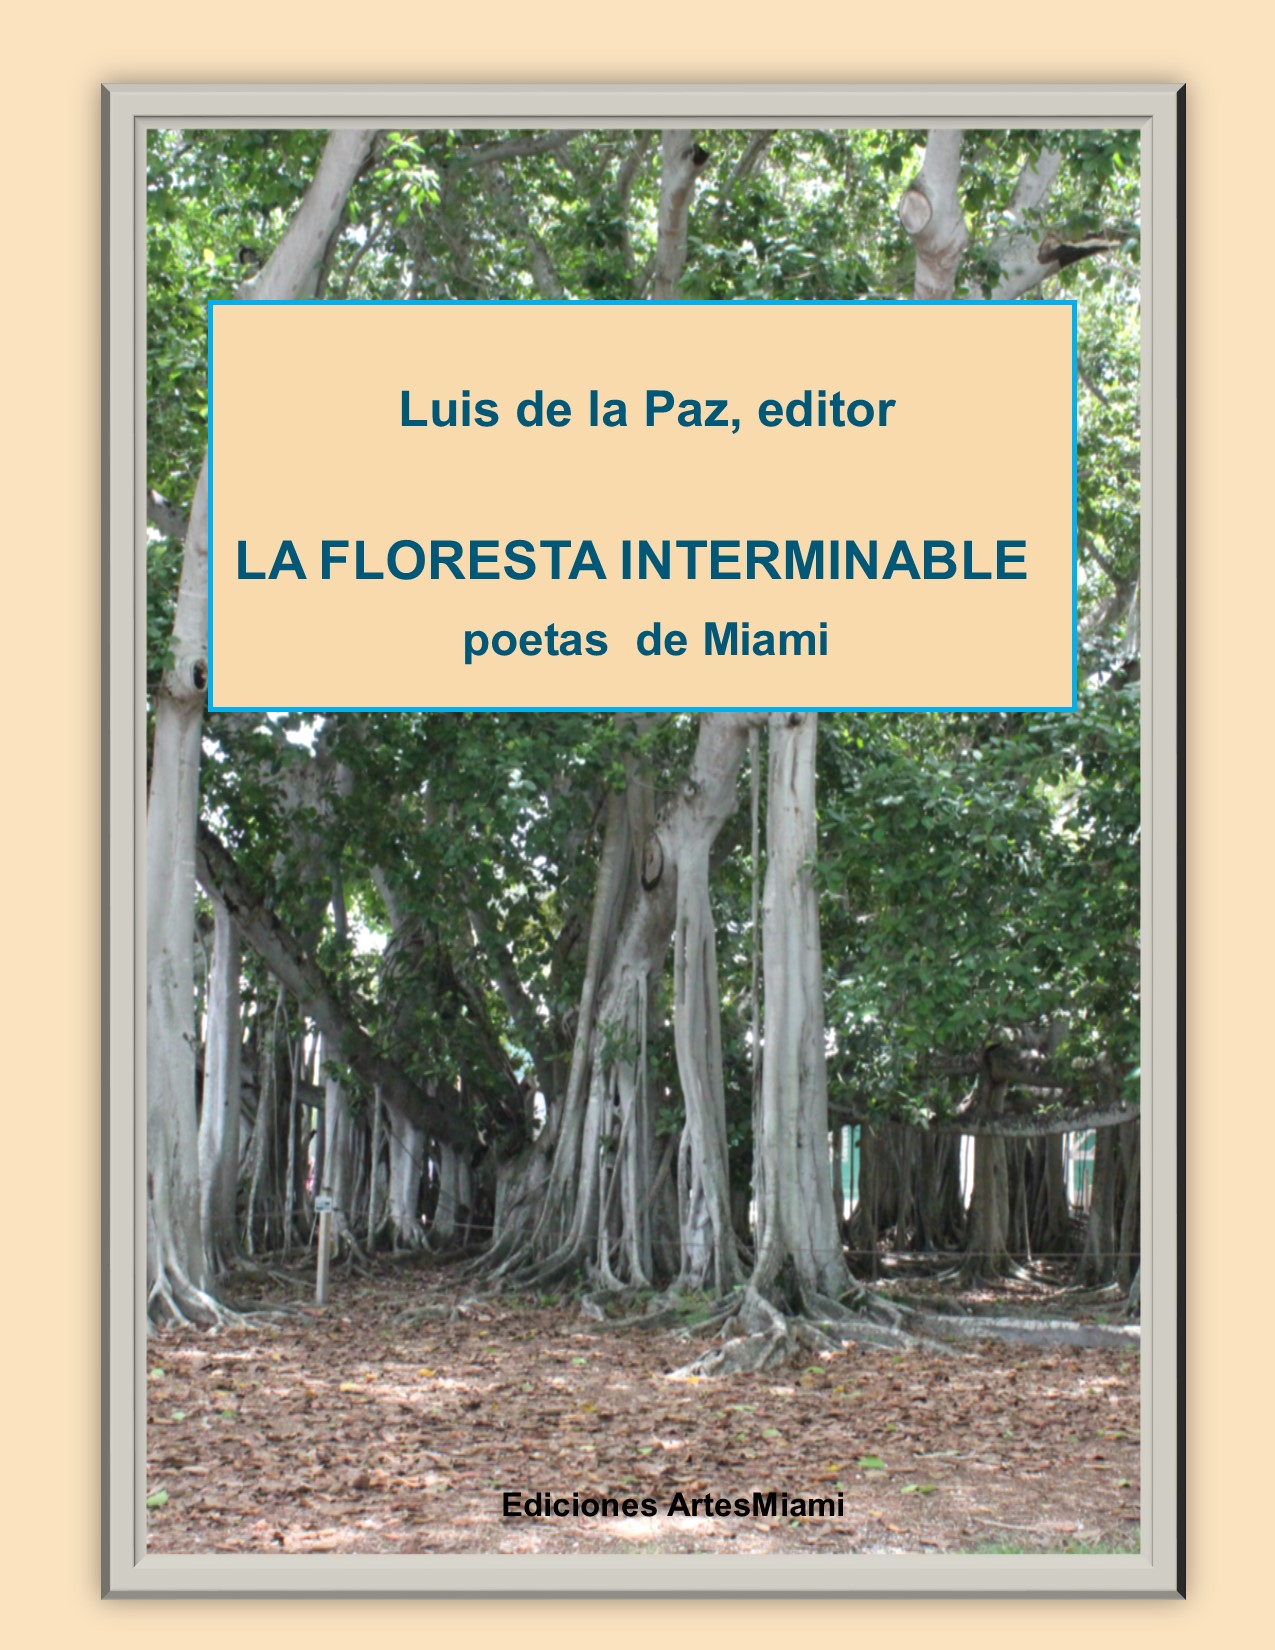 La Floresta Interminable is the most recent collection of Miami Hispanic poetry